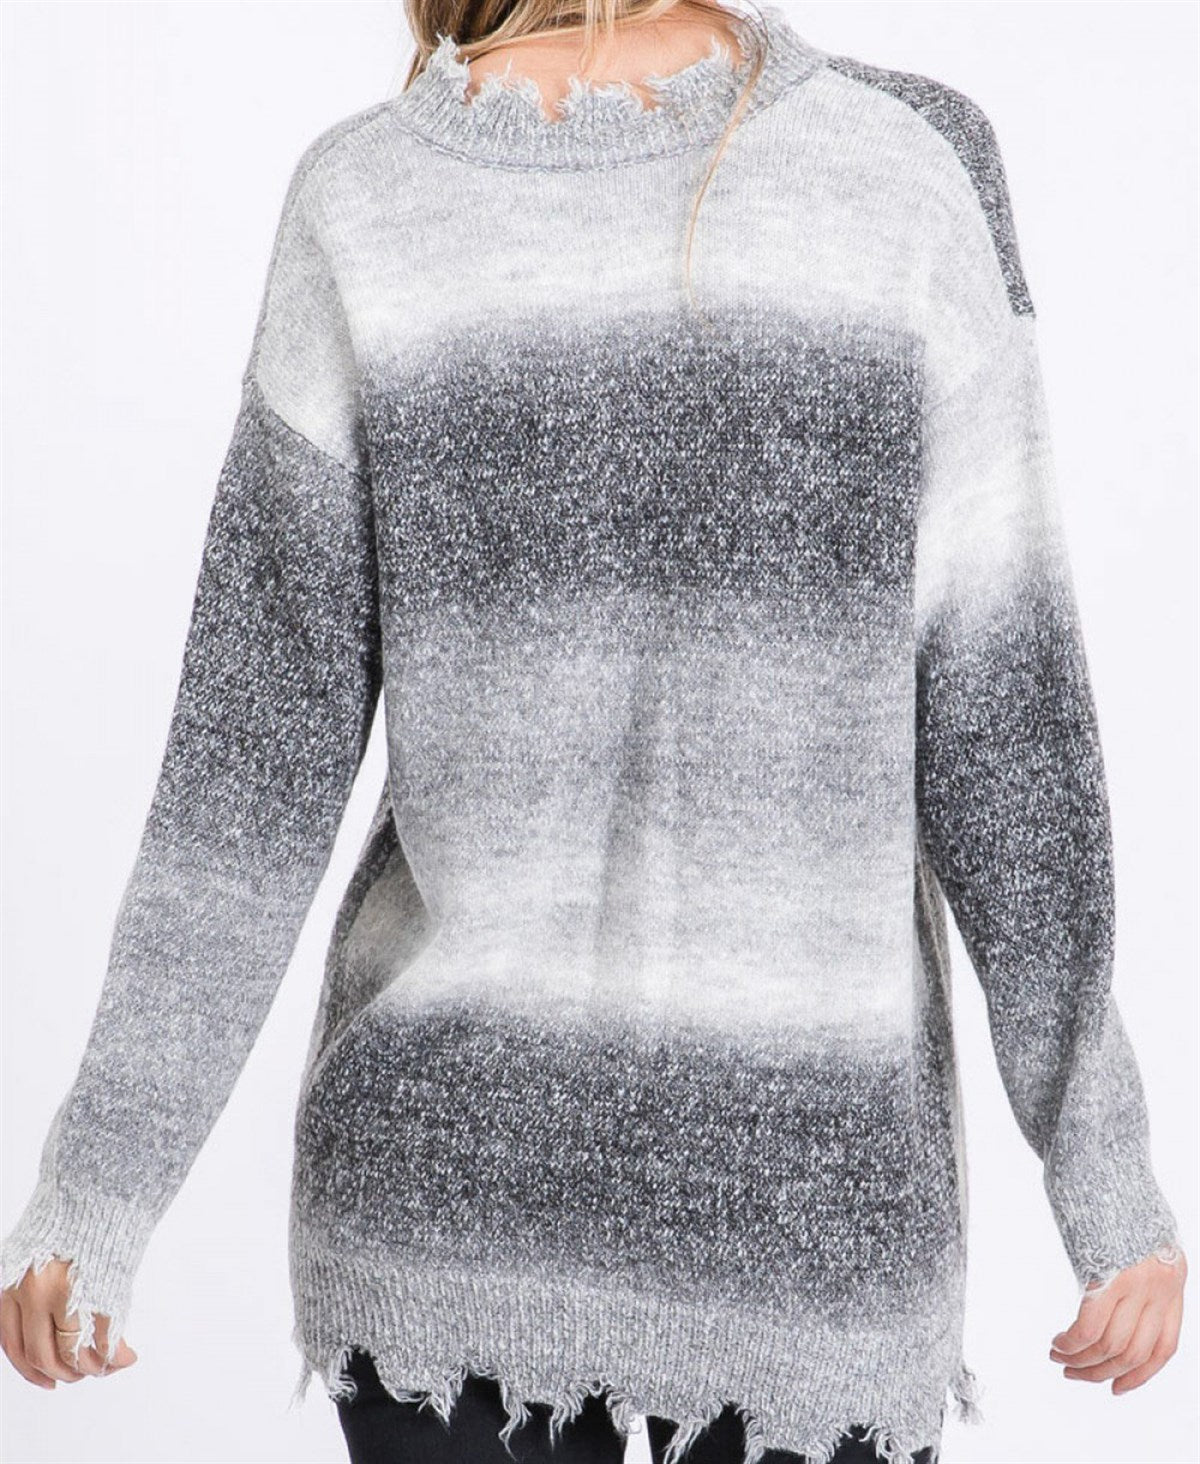 SALE Ombre Distressed Sweater